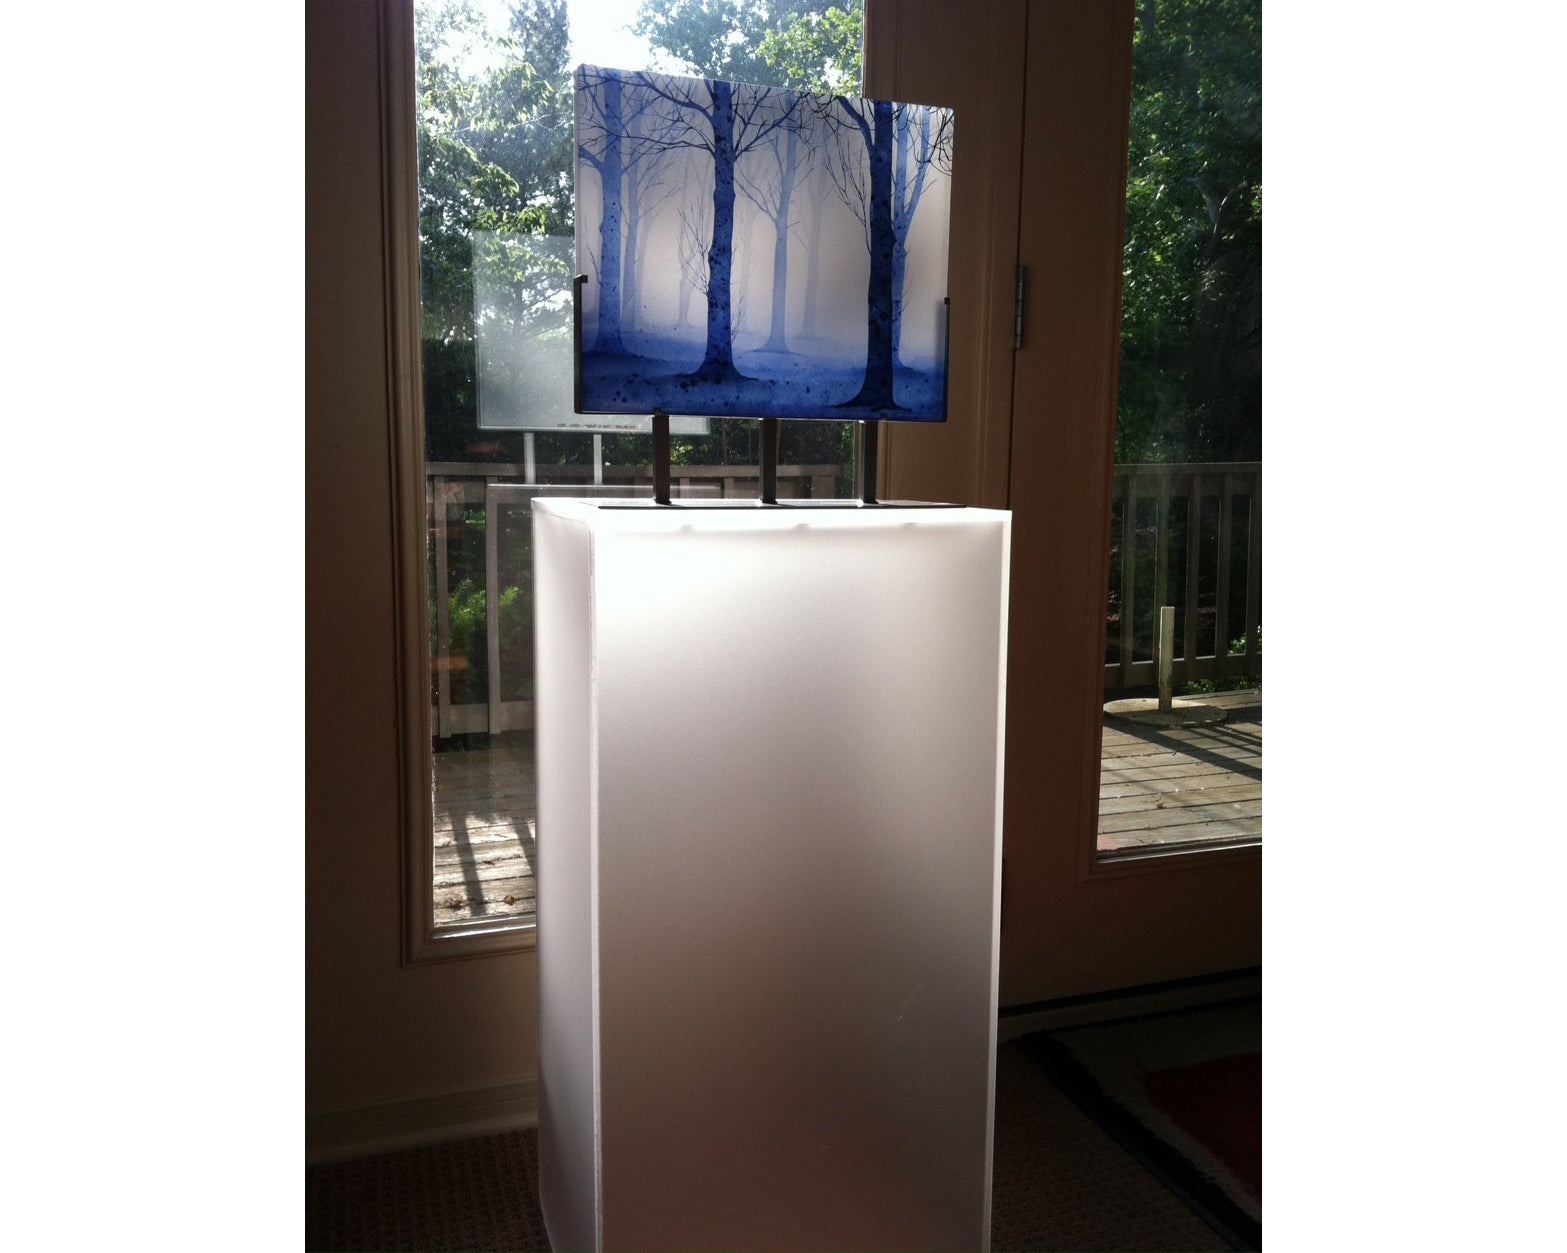 Frosted acrylic pedestal in residential environment displaying a painting/photo of blue tree